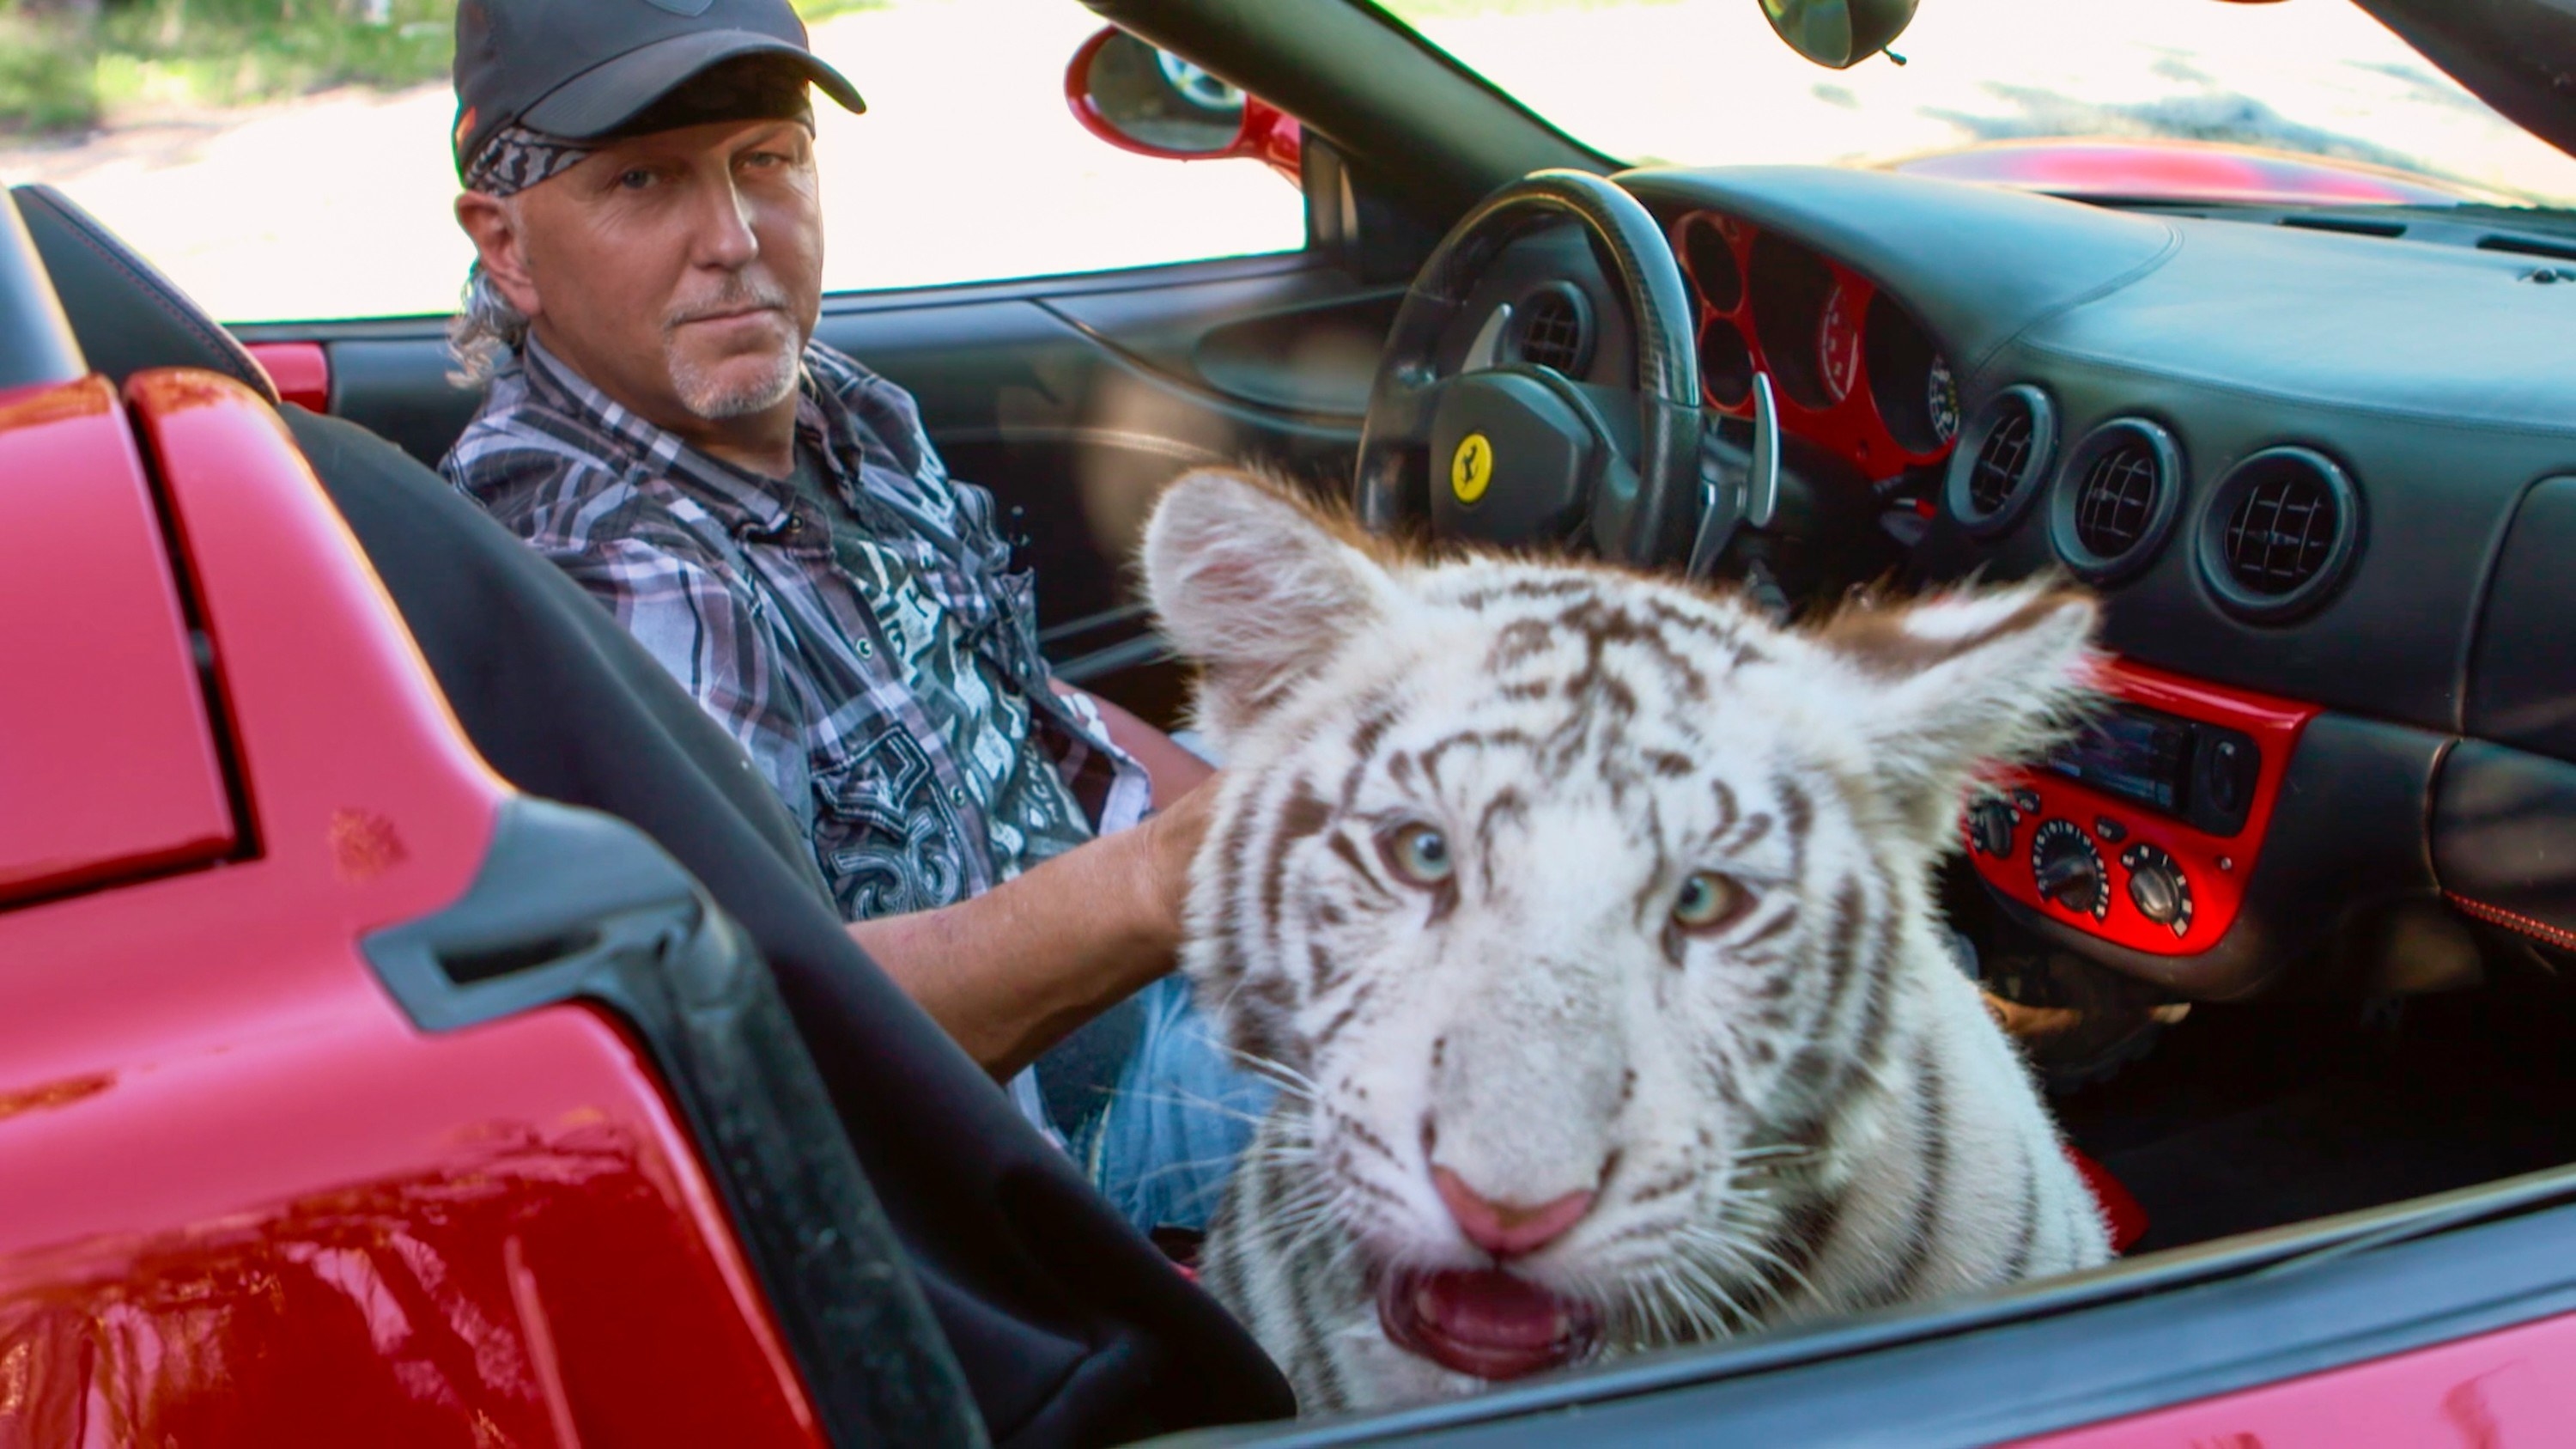 Joe sits in a convertible with a tiger